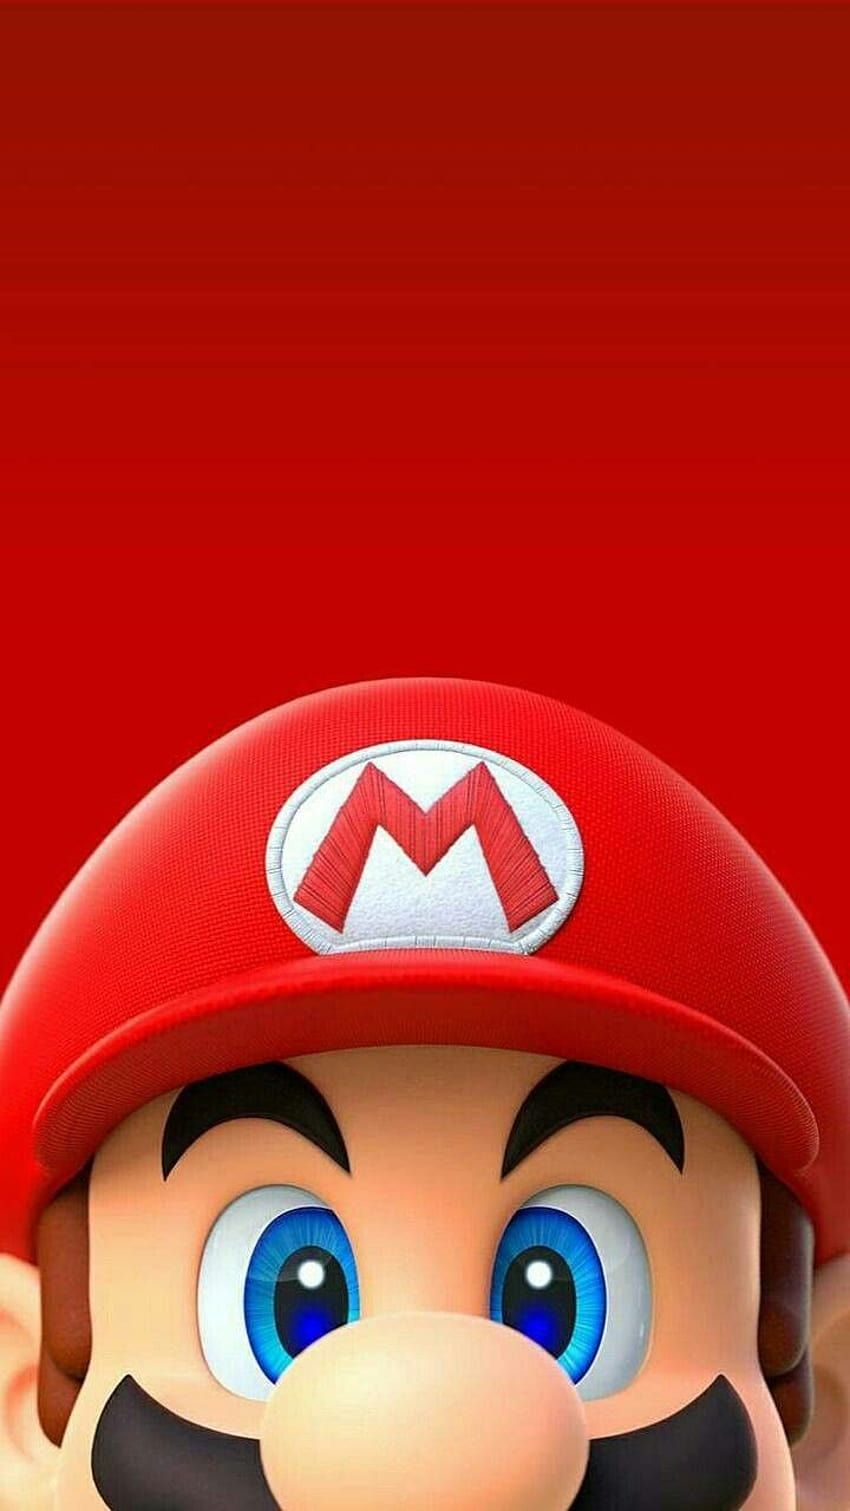 Mario wallpaper for iPhone and Android. - 